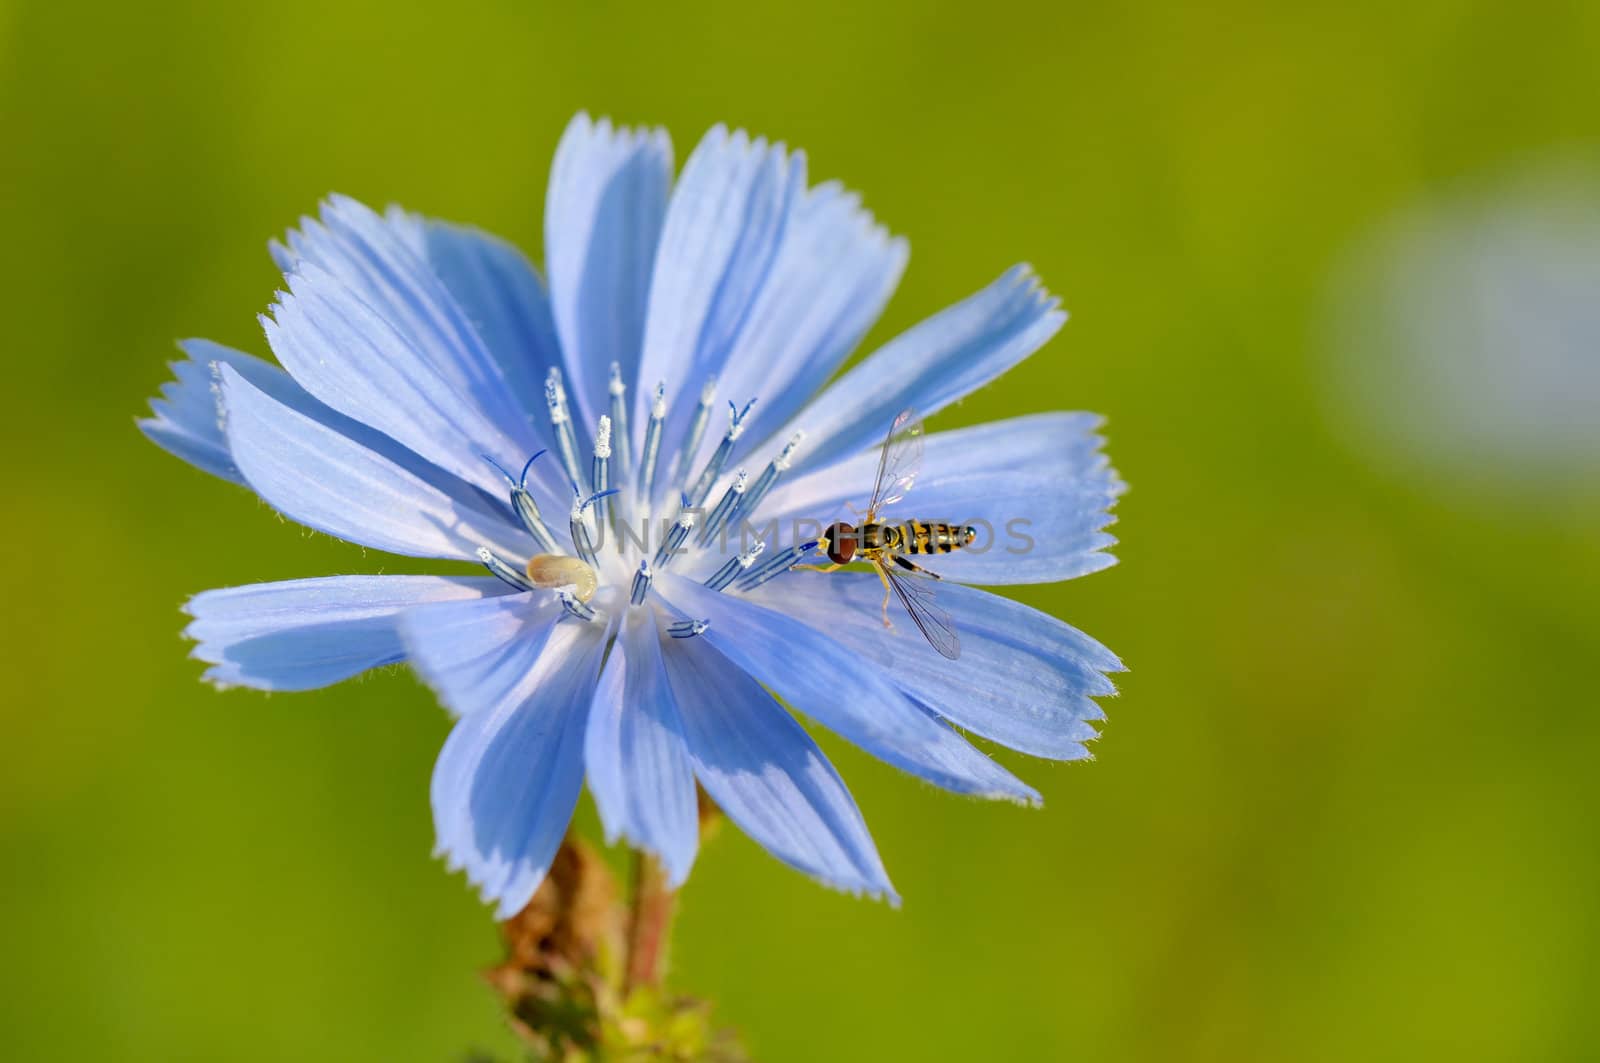 Hoverfly on chicory by Hbak